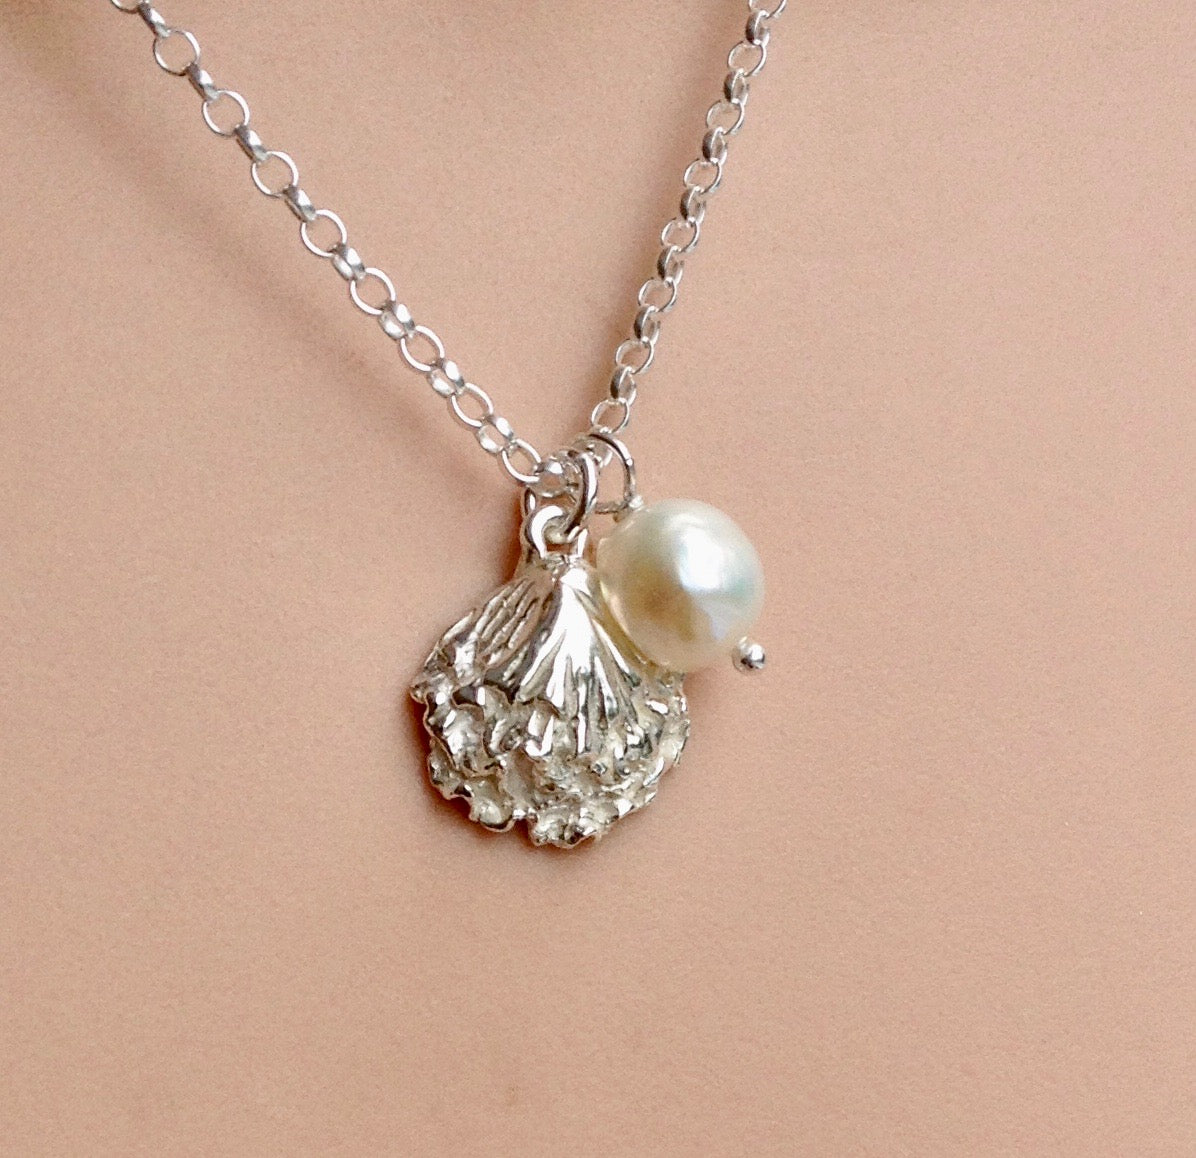 Silver oyster shell necklace